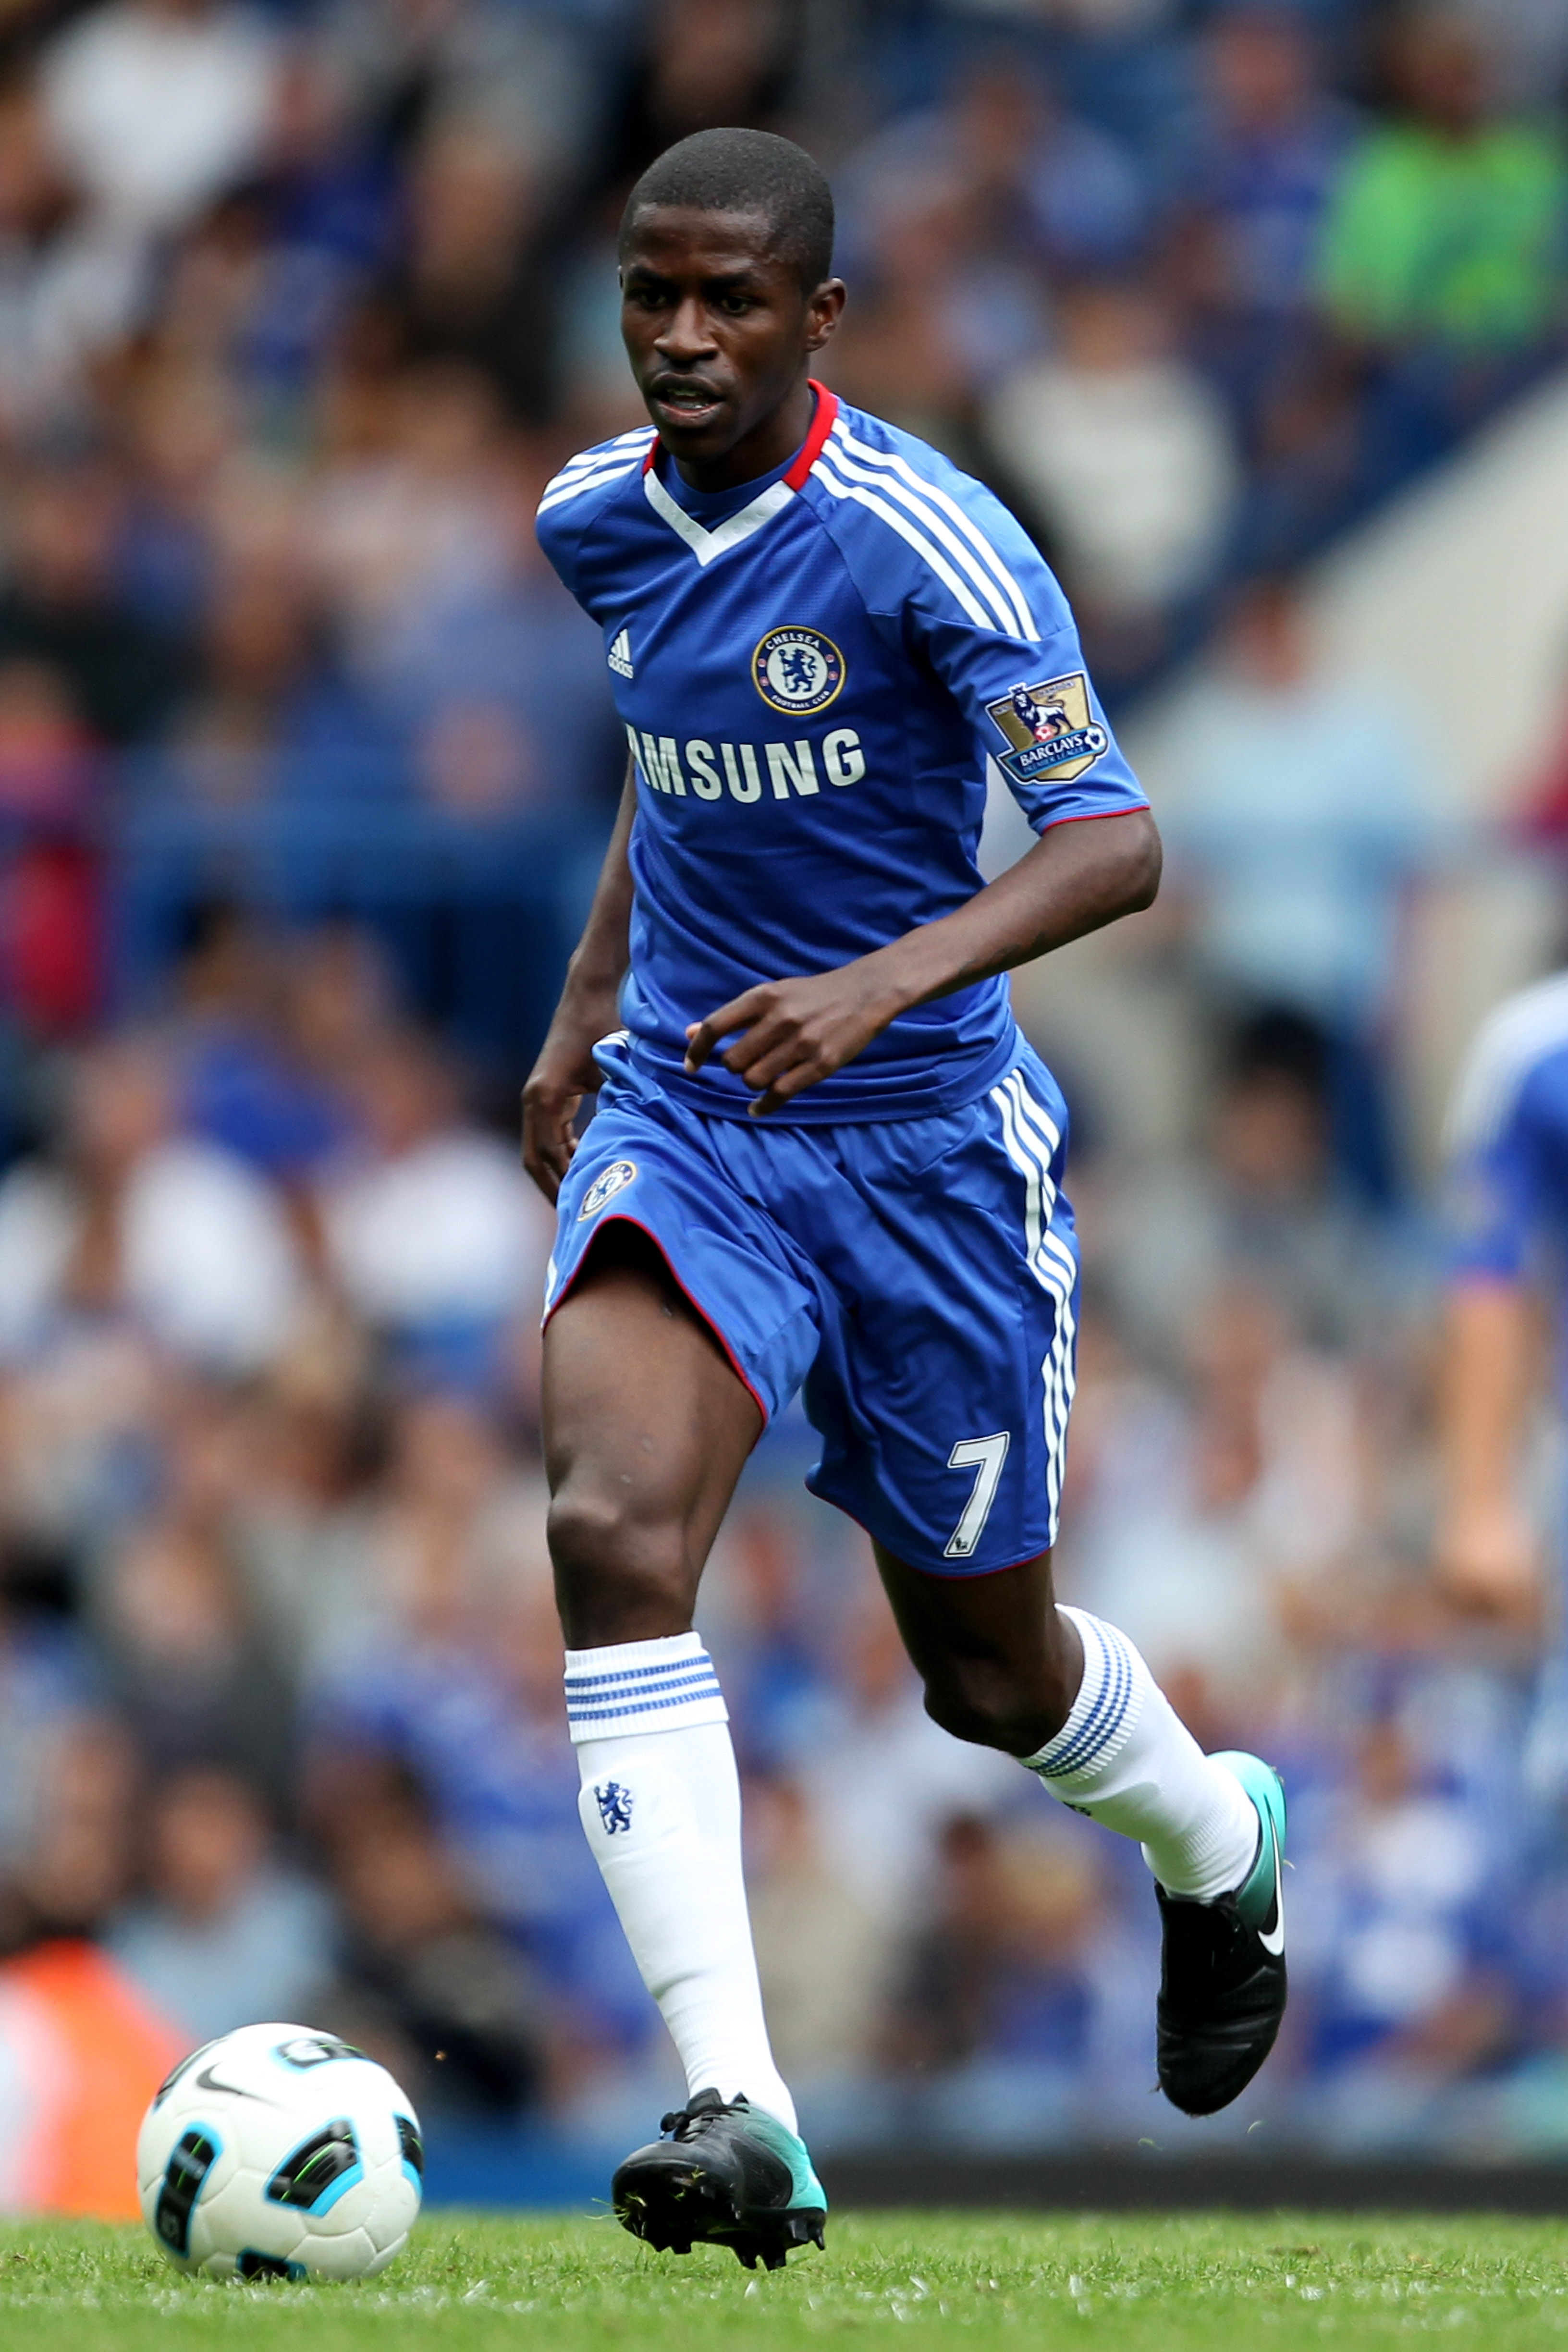 LONDON, ENGLAND - AUGUST 28:  Ramires of Chelsea makes his home debut during the Barclays Premier League match between Chelsea and Stoke City at Stamford Bridge on August 28, 2010 in London, England.  (Photo by Bryn Lennon/Getty Images)